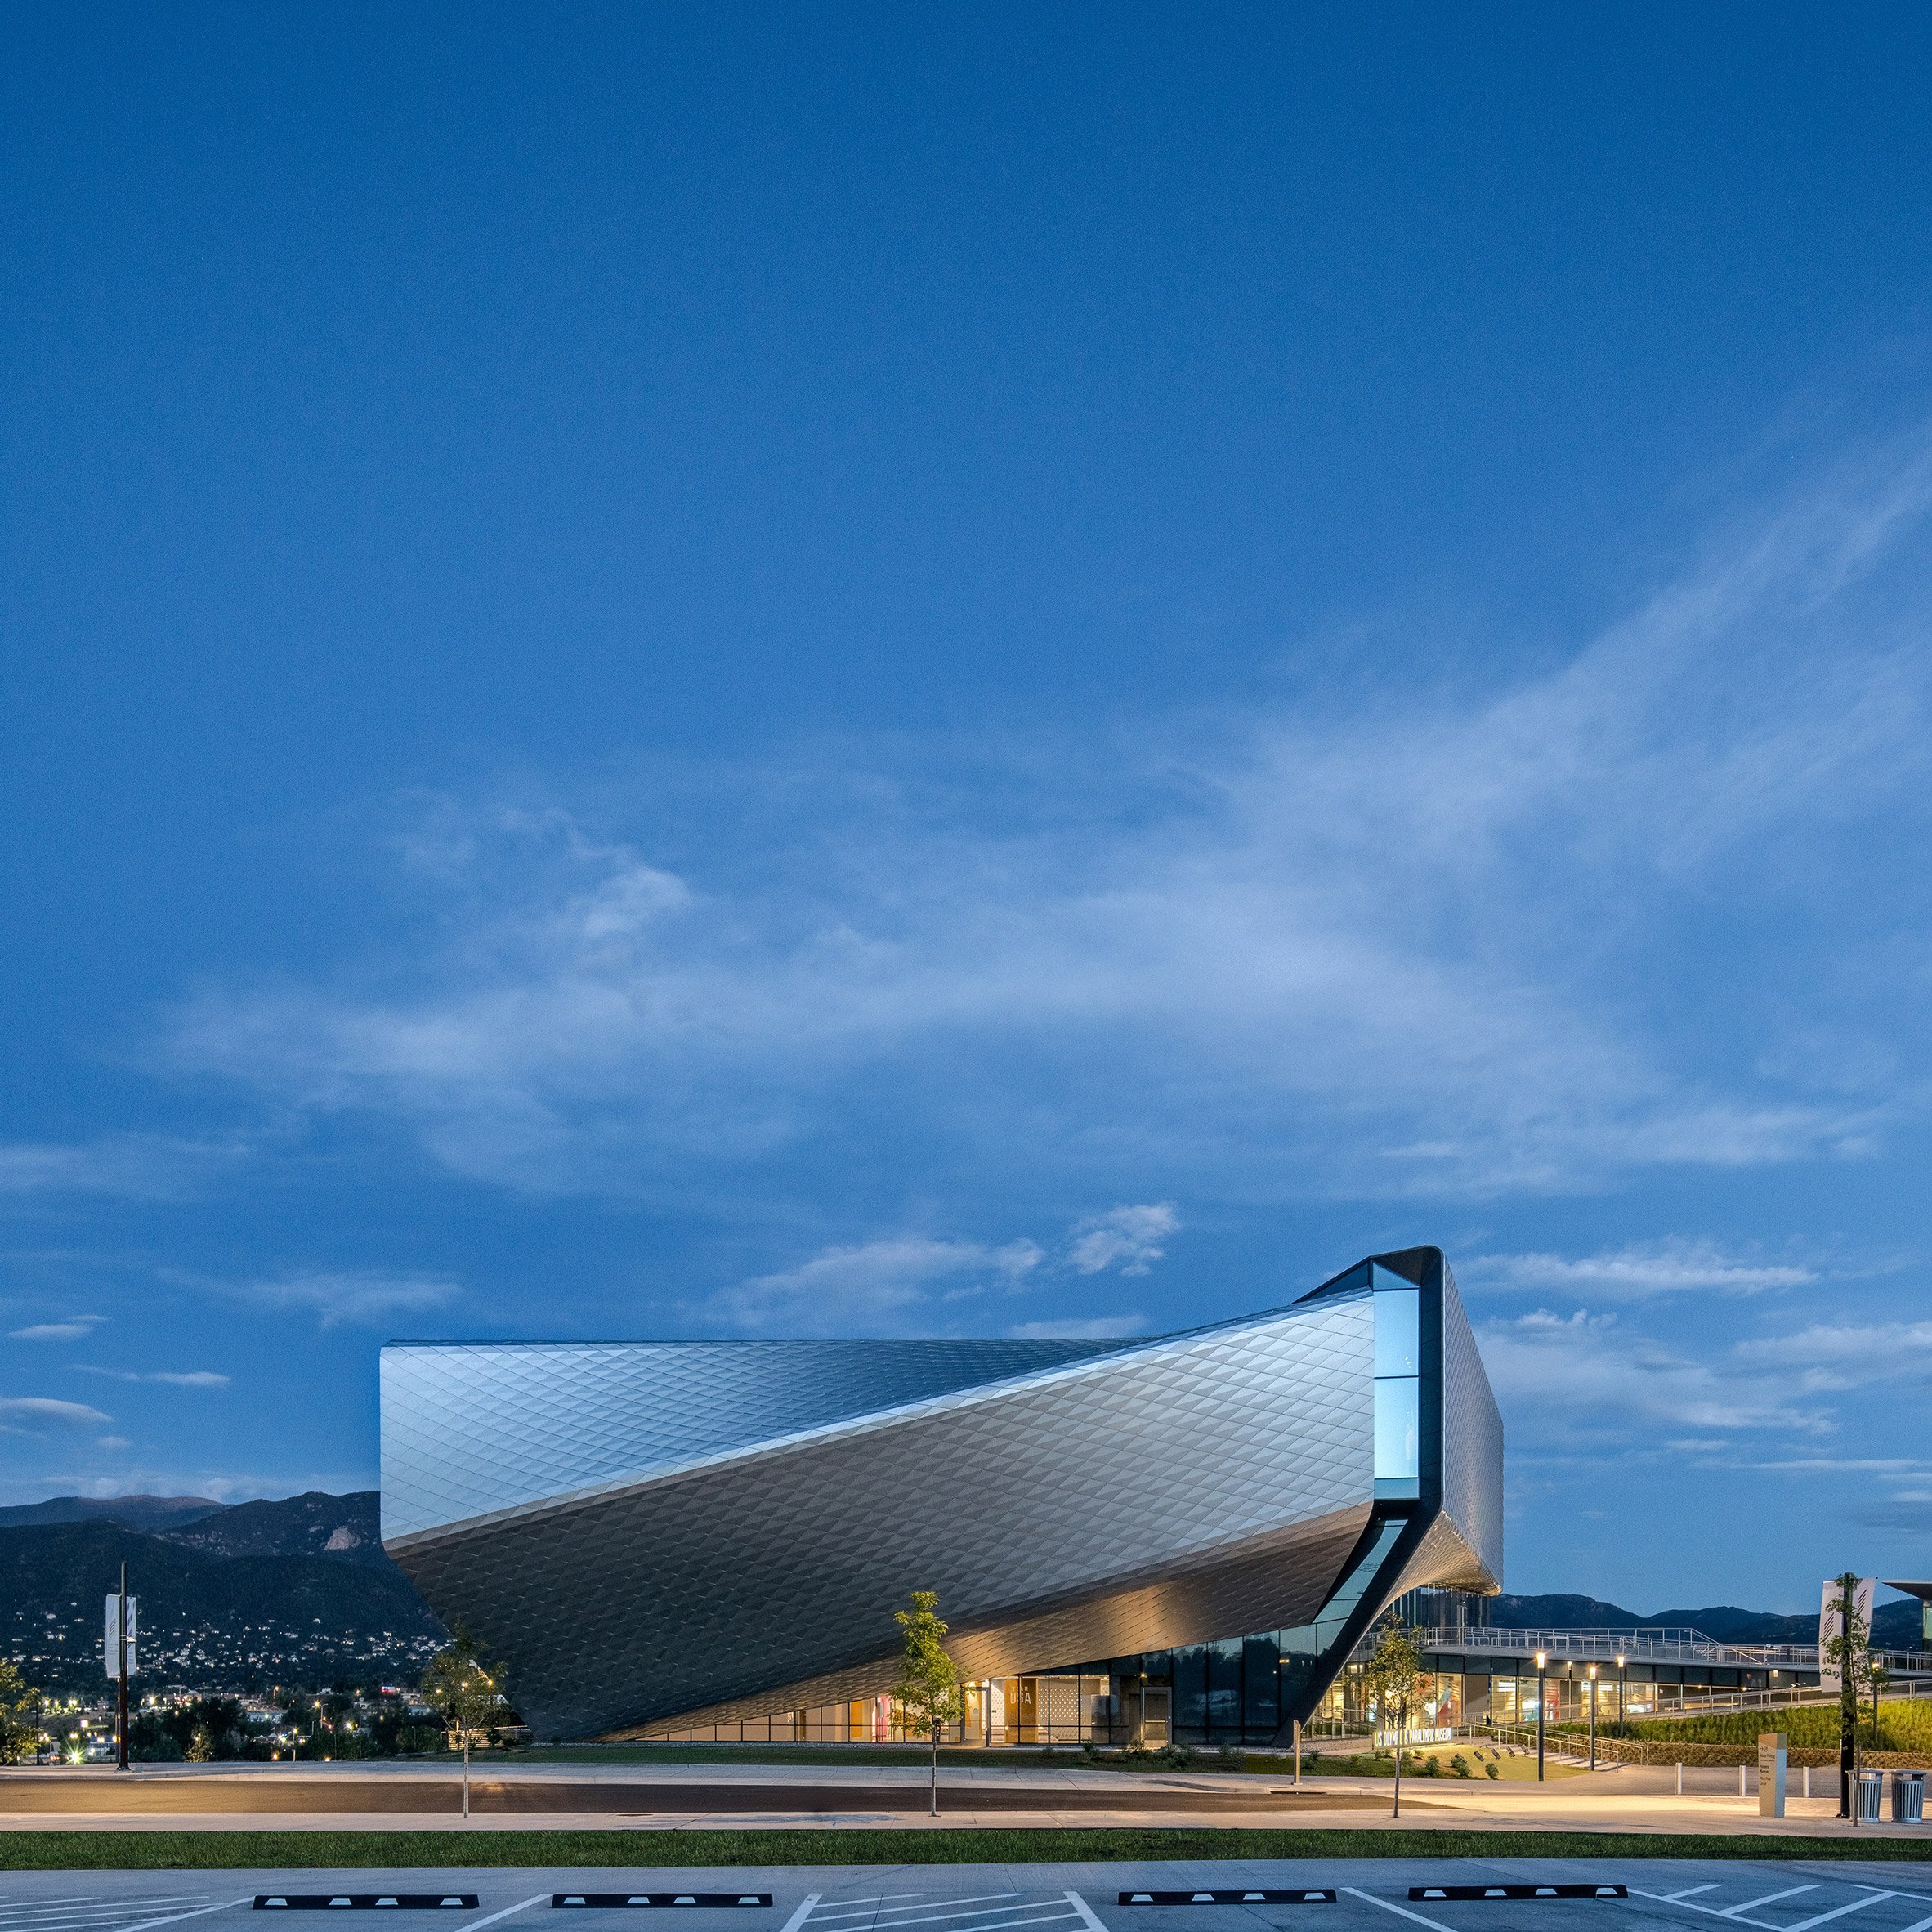 US Olympic and Paralympic Museum by Diller Scofidio + Renfro